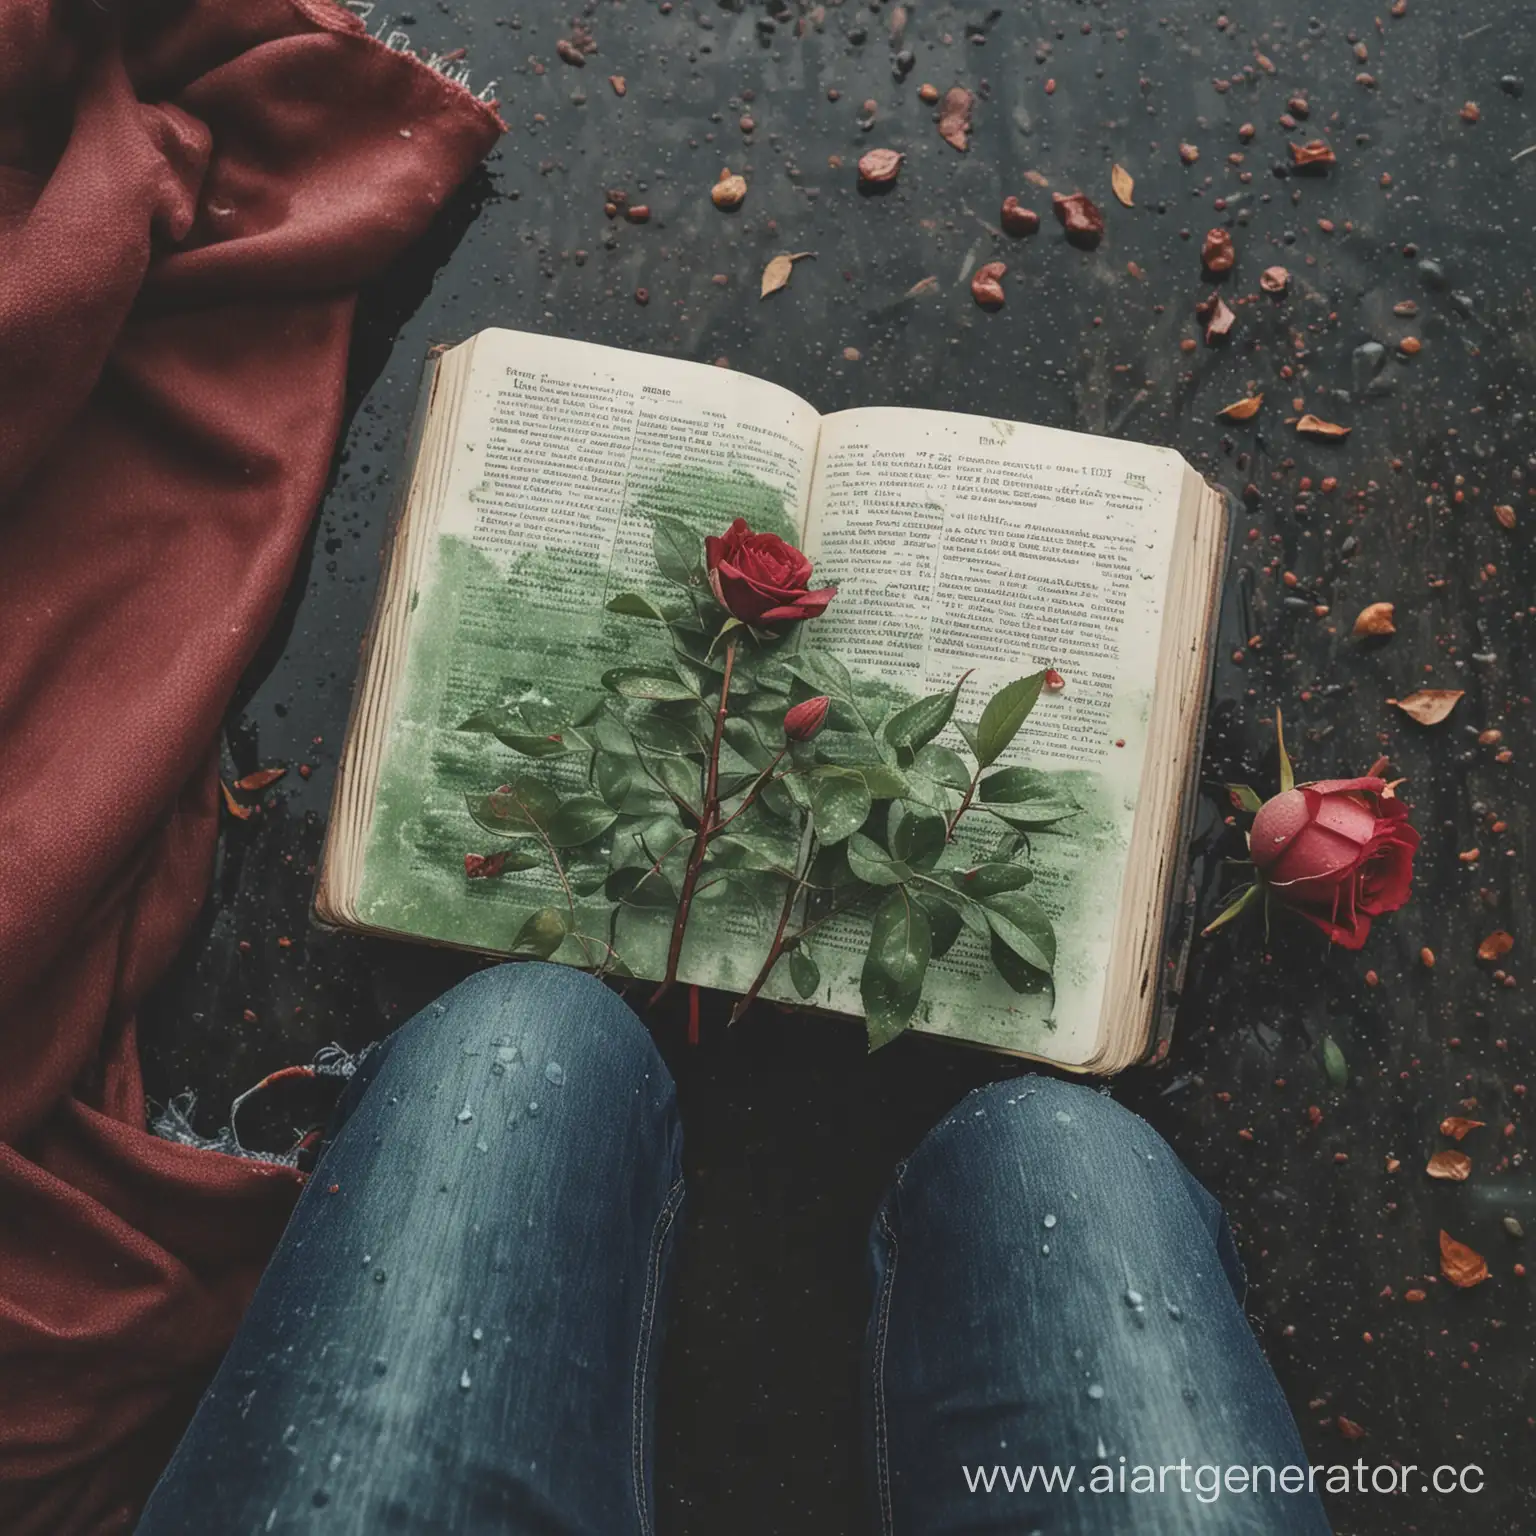 Autumn-Rainy-Day-Exploring-Nature-with-a-Book-and-Pencil